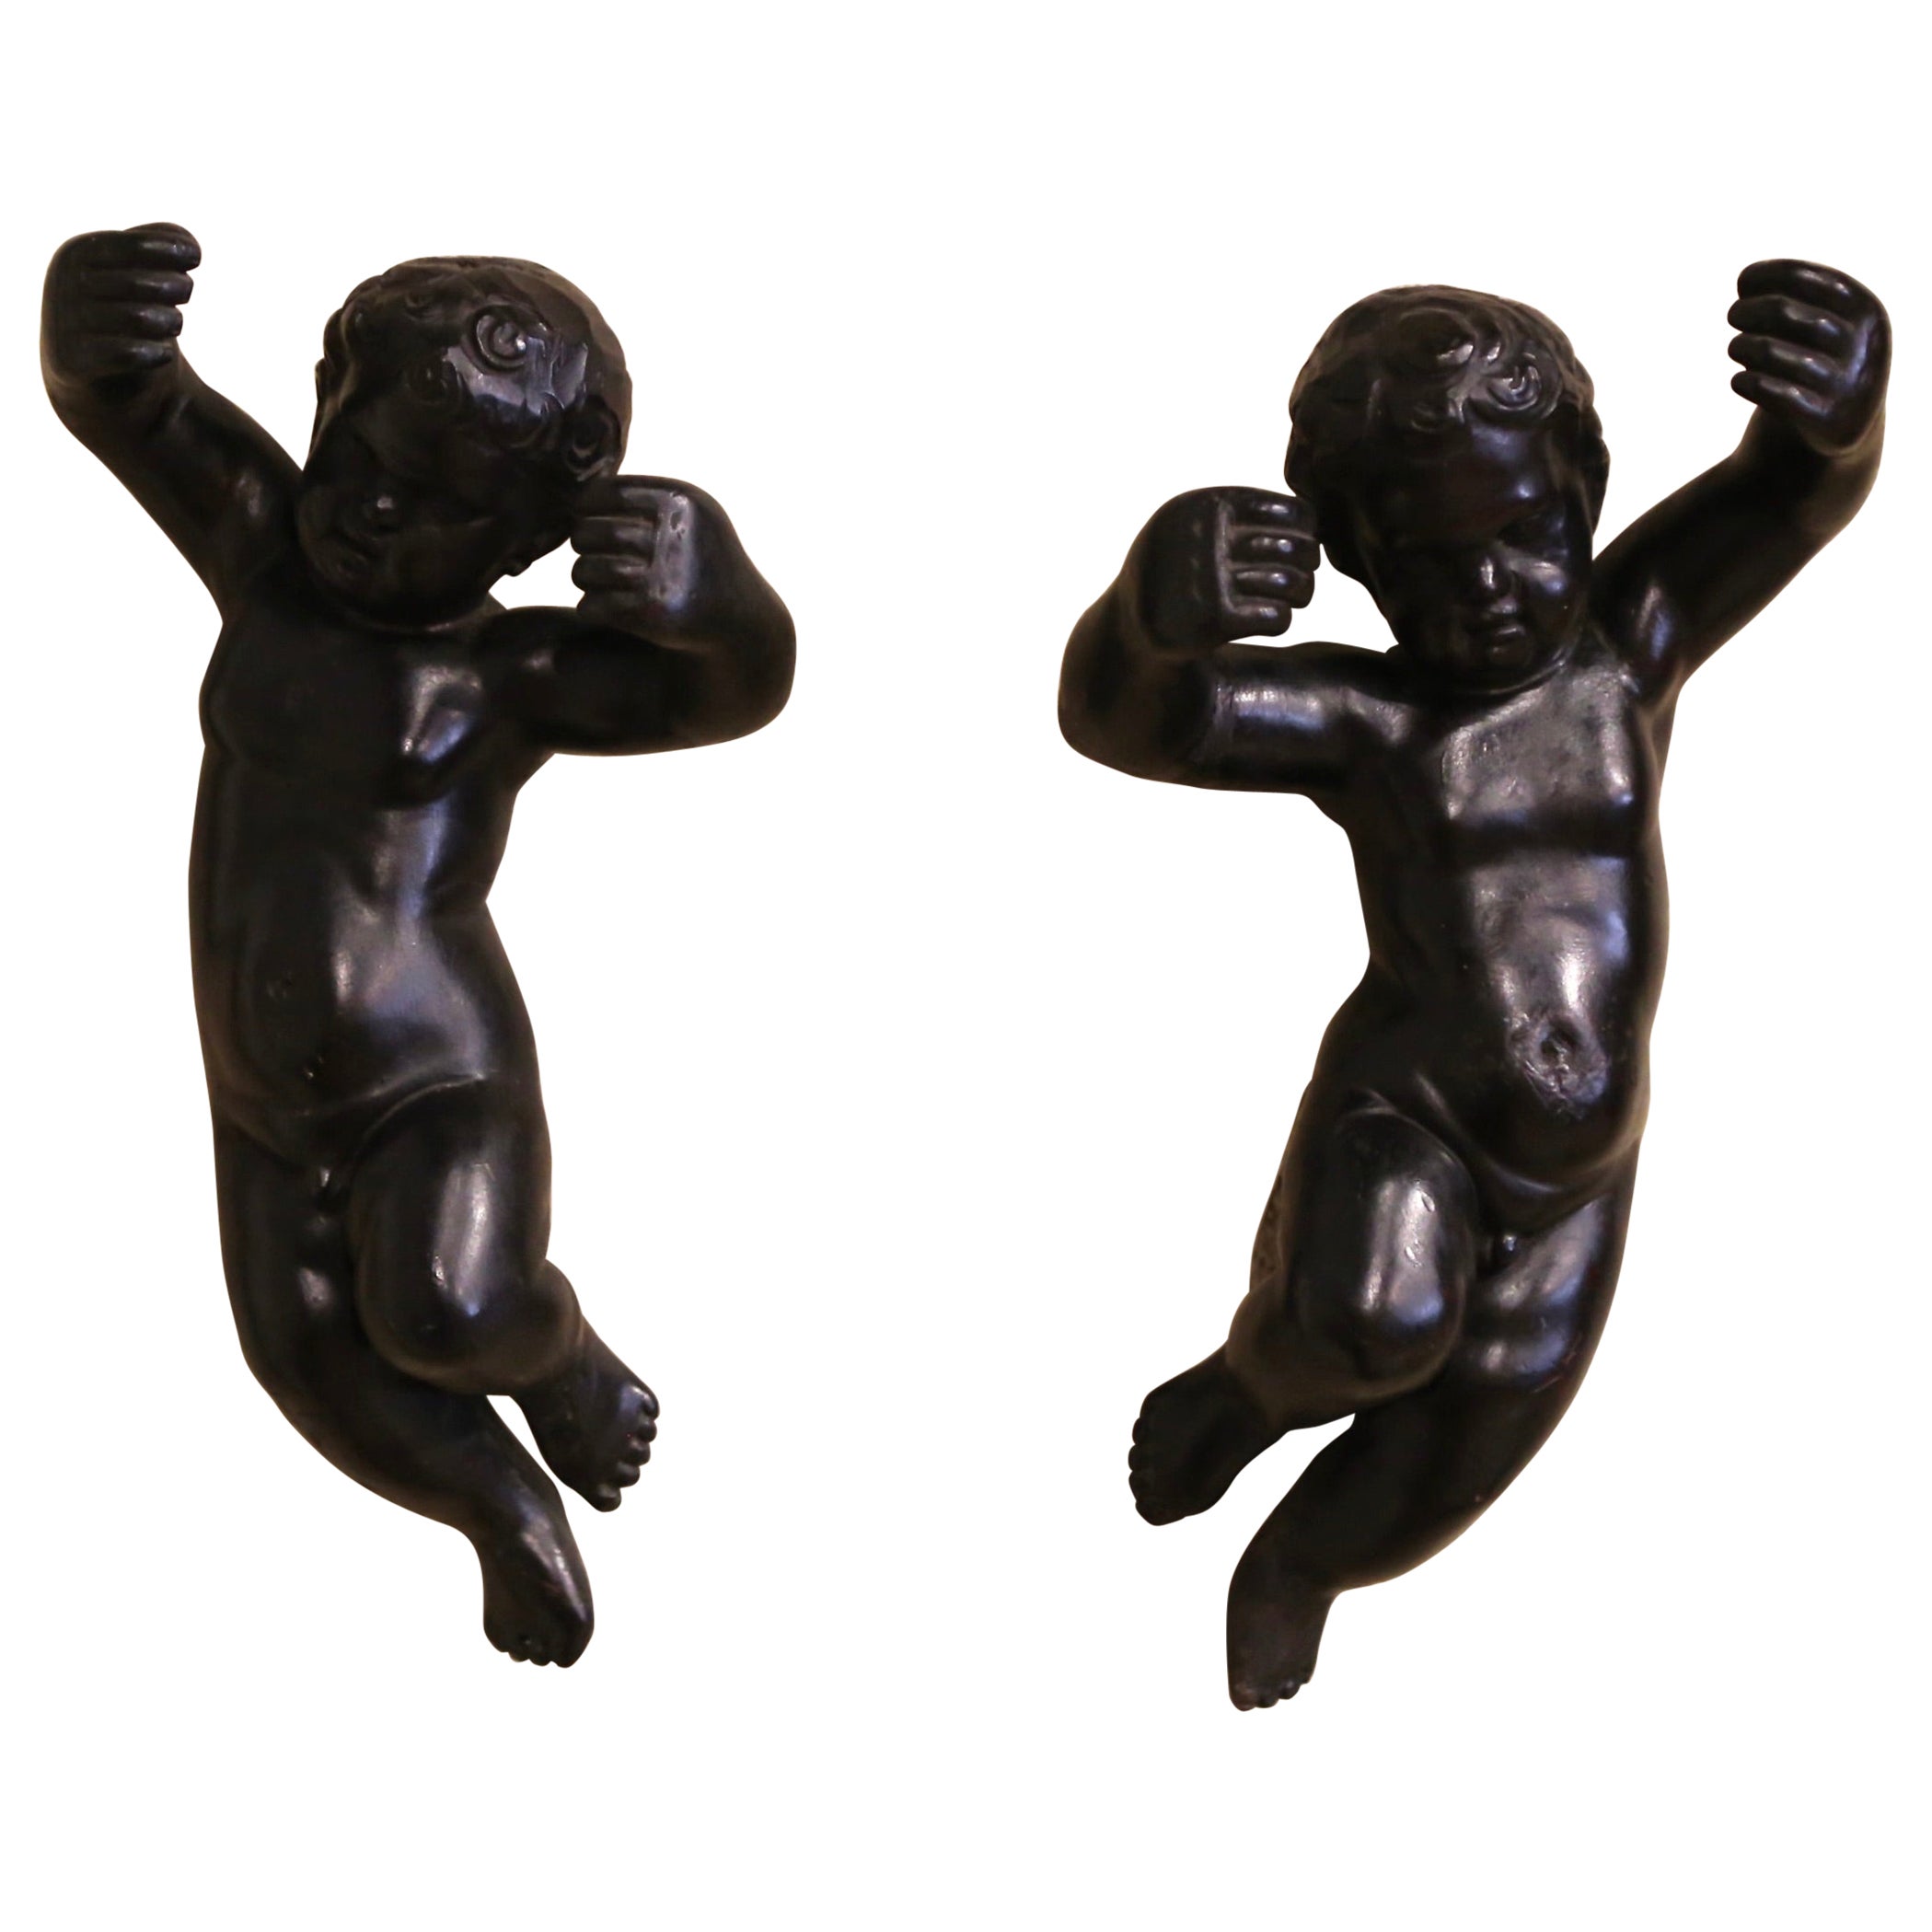 Pair of 19th Century Italian Carved Blackened Wall Hanging Cherub Sculptures For Sale